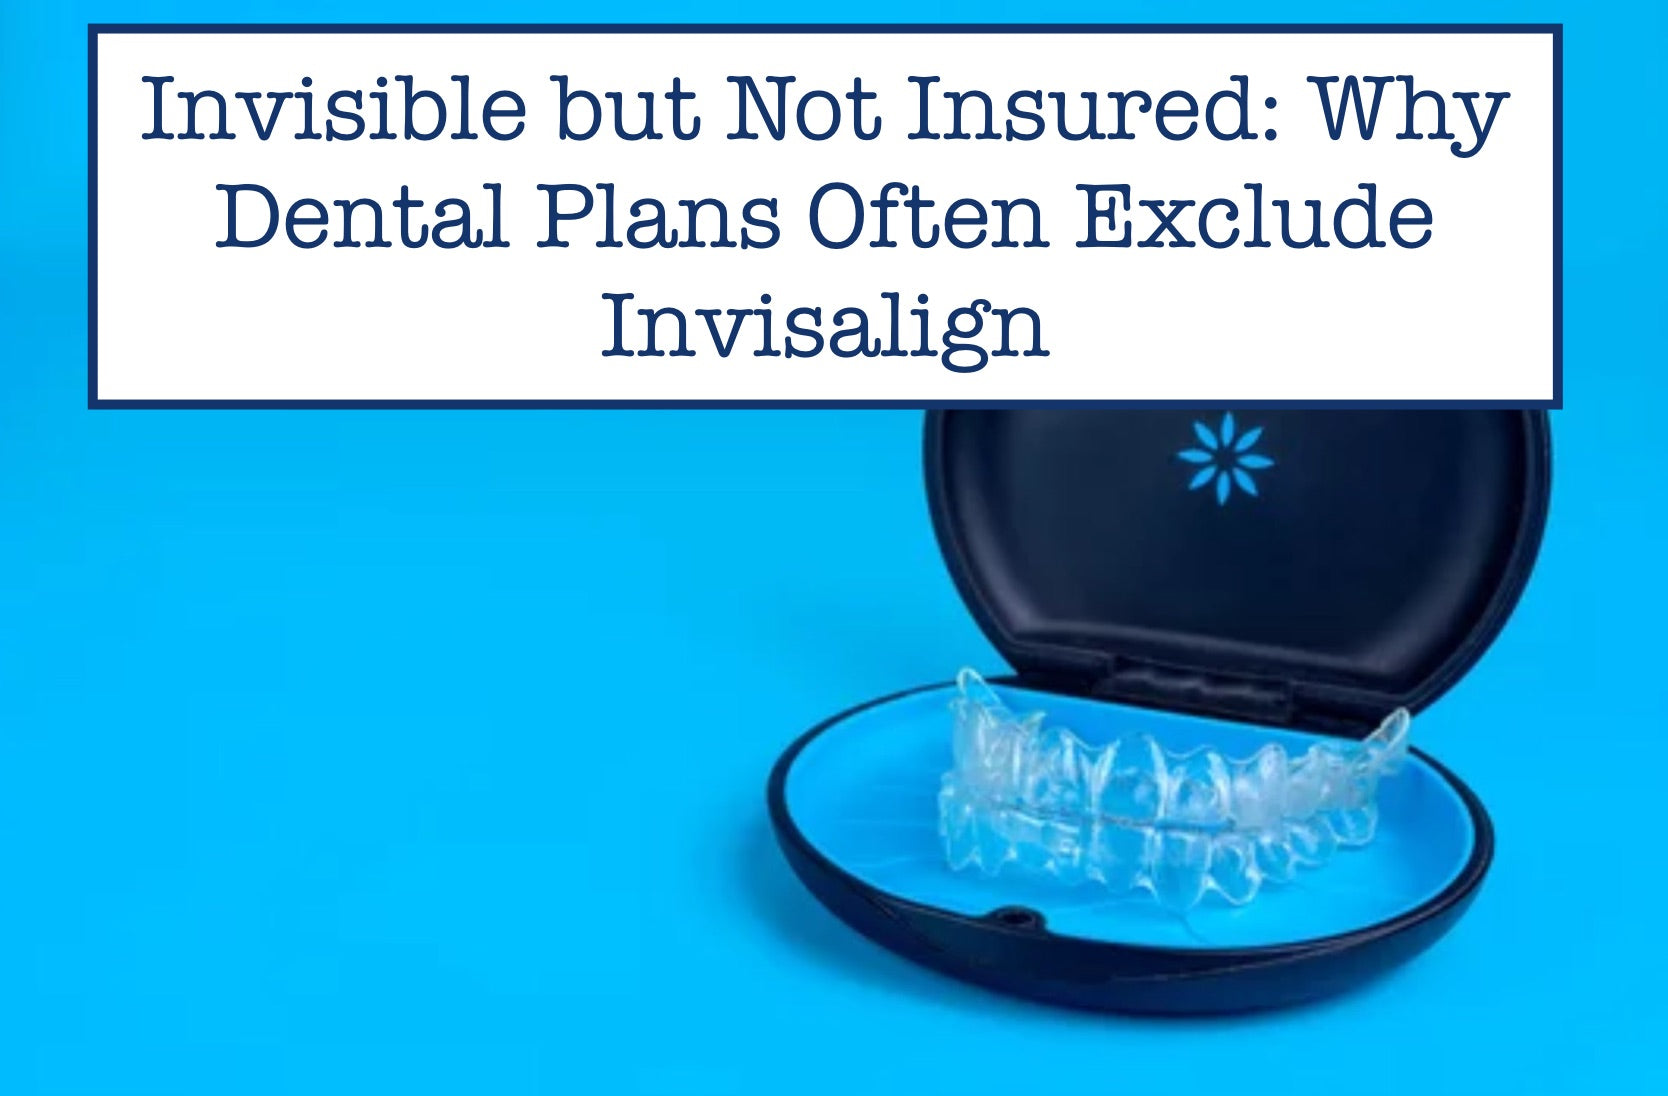 Invisible but Not Insured: Why Dental Plans Often Exclude Invisalign